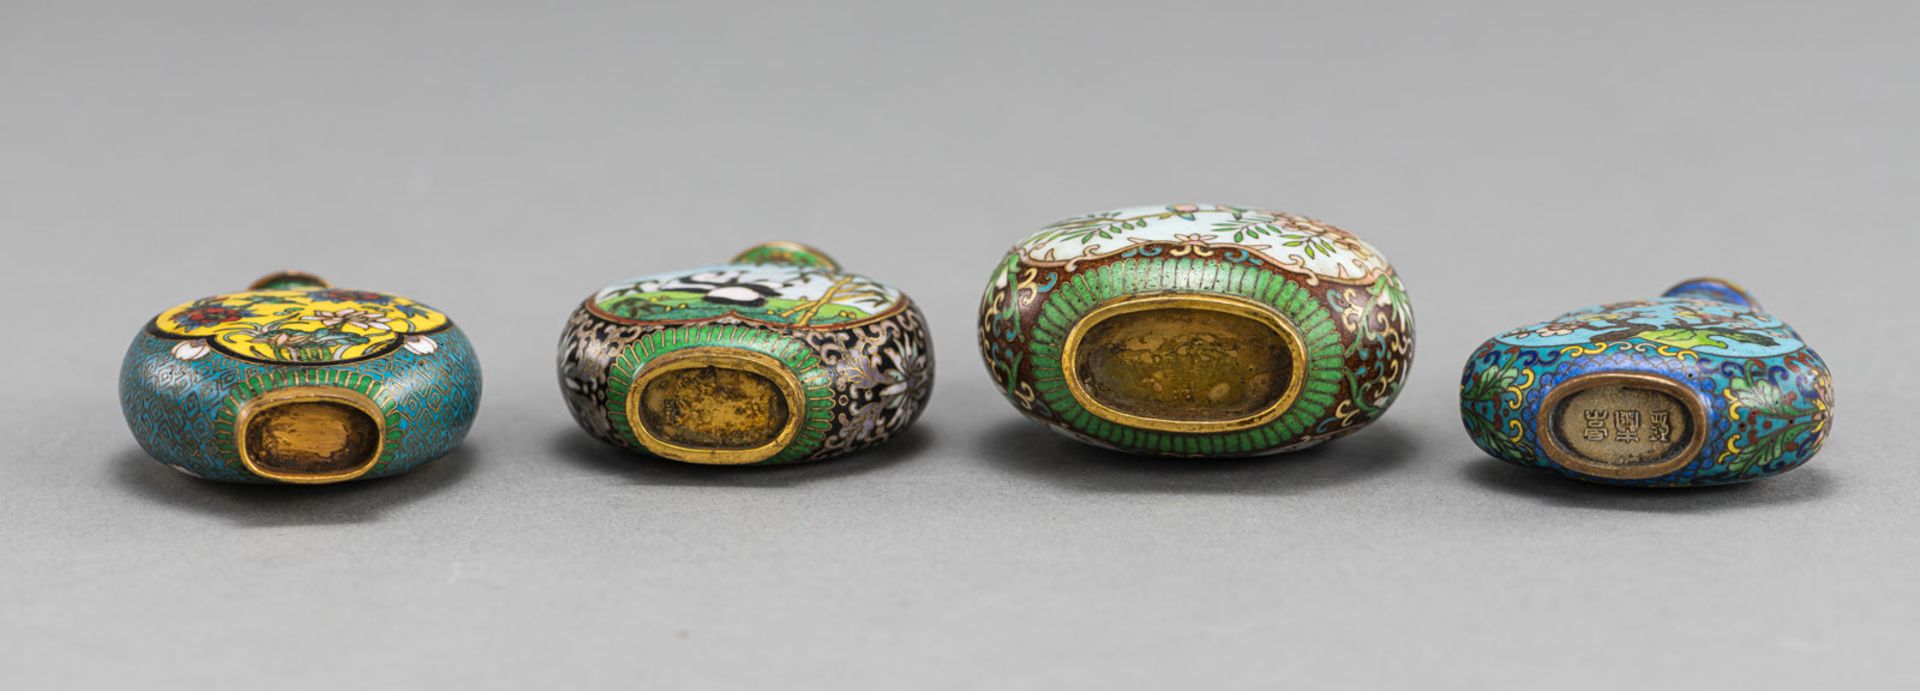 FOUR CLOISONNÉ SNUFFBOTTLES WITH DEPICTIONS OF FLOWERS AND ANIMALS - Image 3 of 3